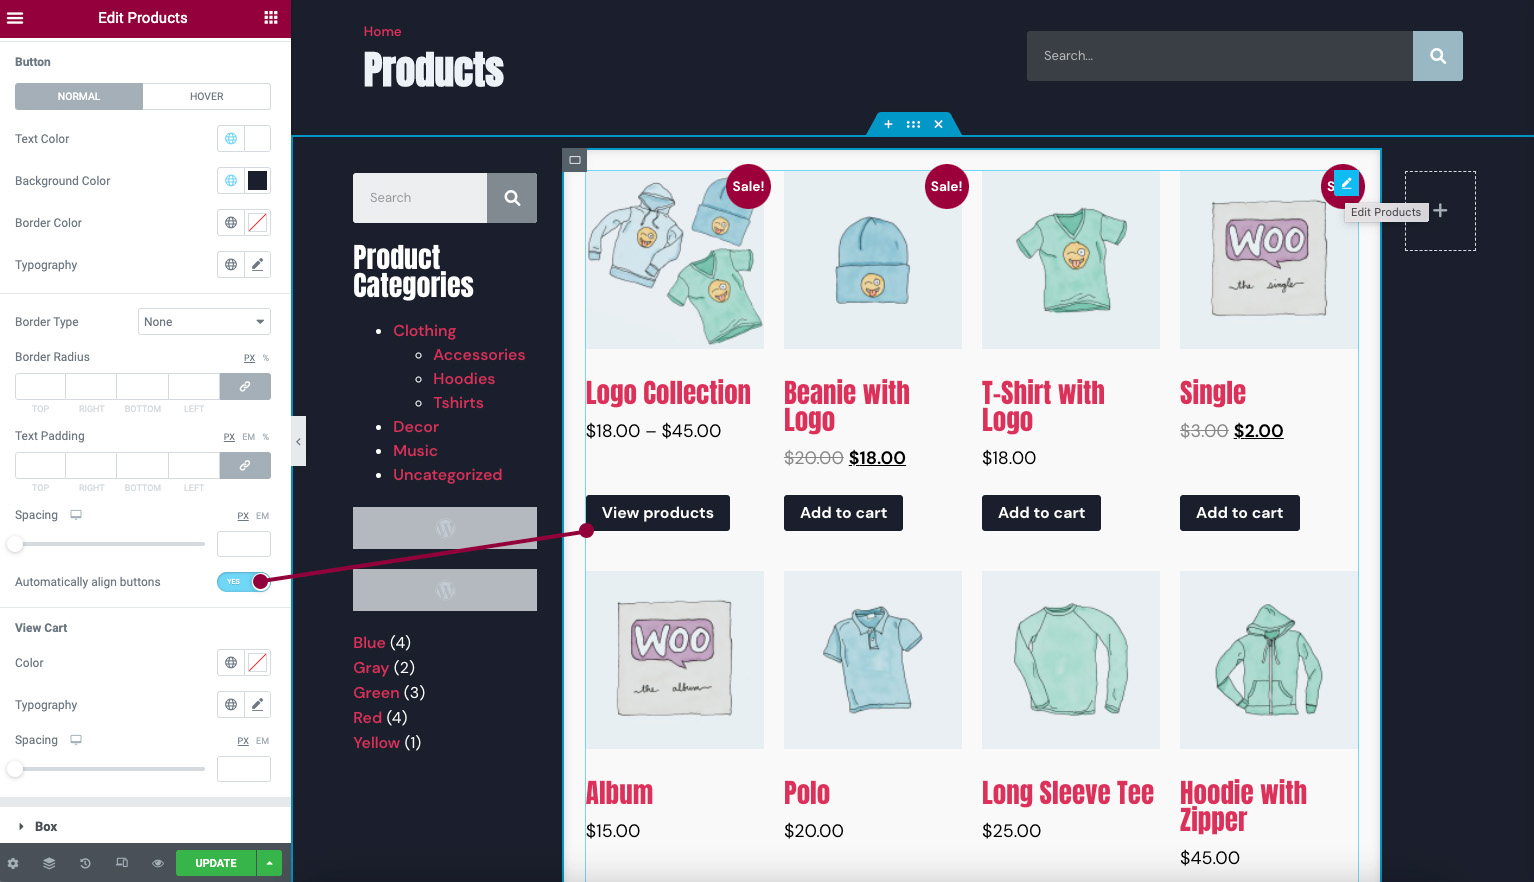 Align Product Widget Buttons Display WooCommerce products 100